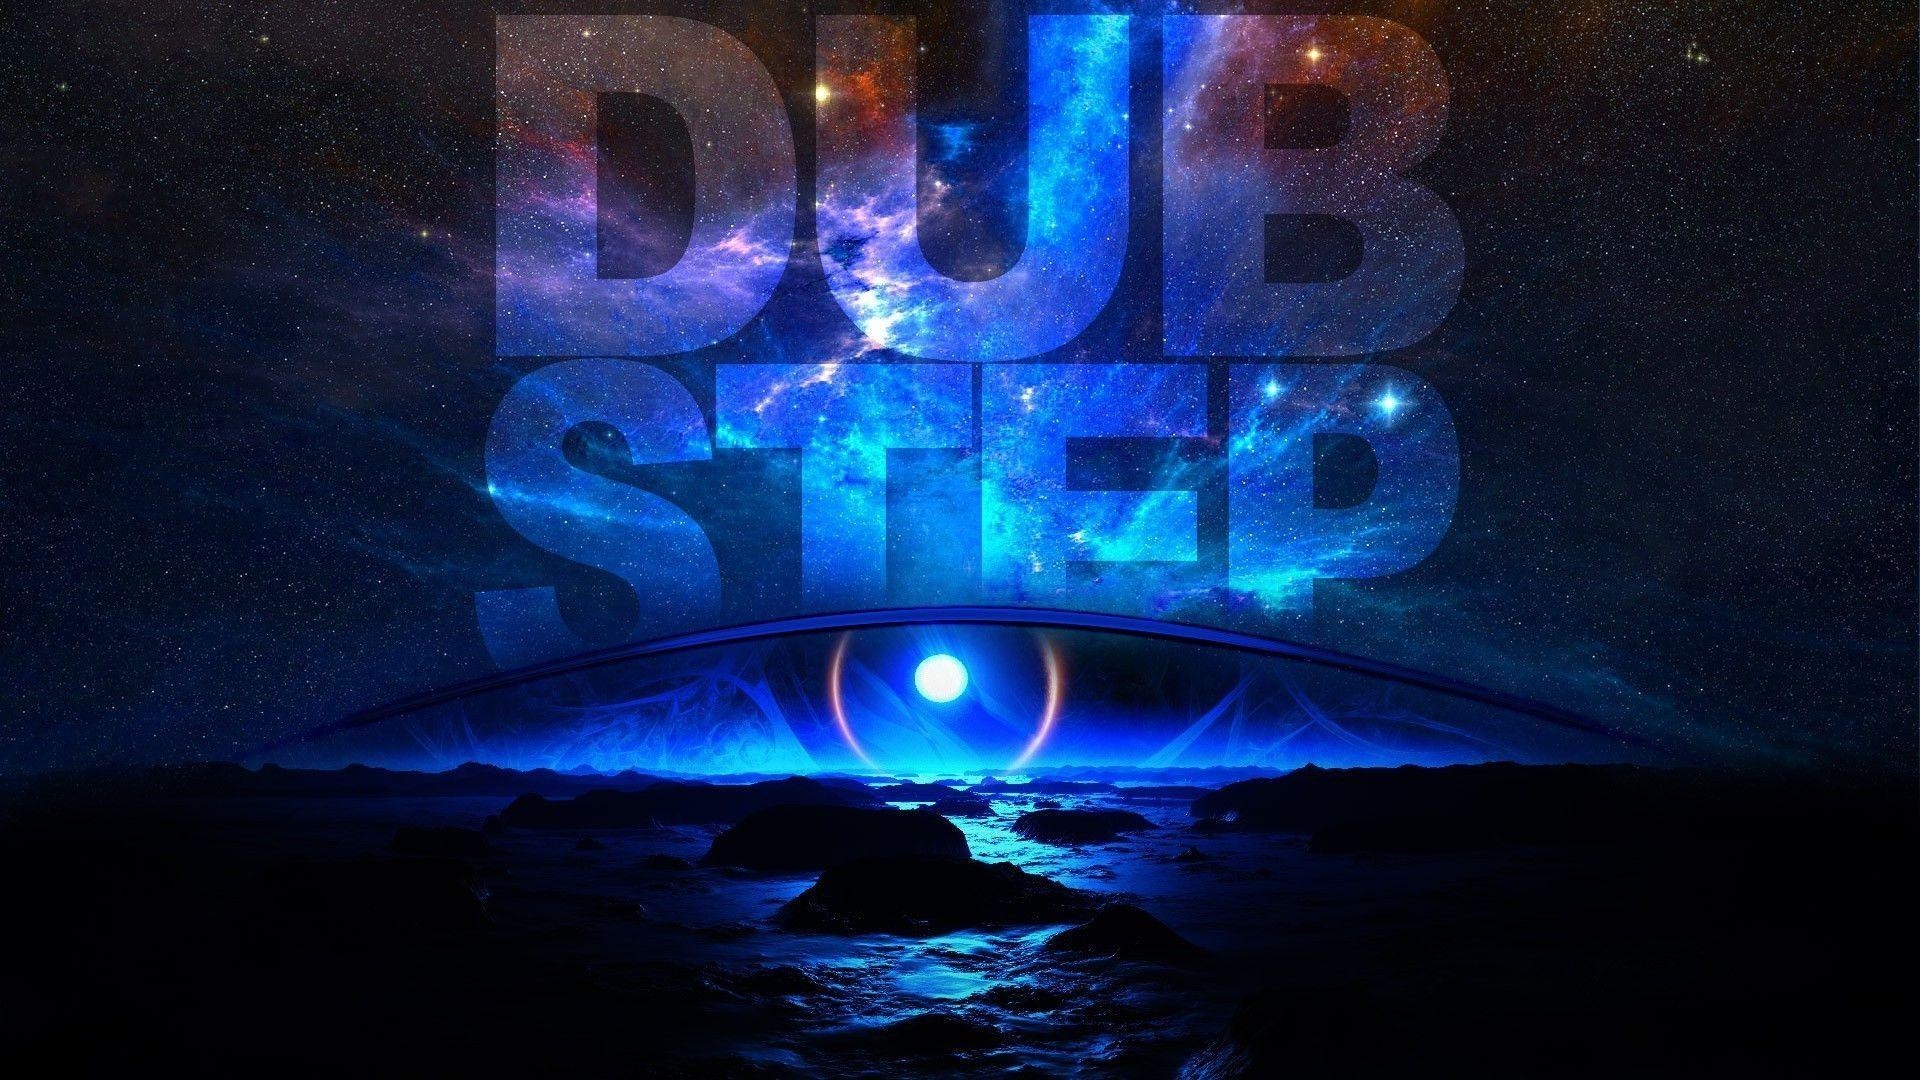 1920x1080 Lovely Dubstep Wallpapers Wallpaper Cave Of Awesome Dubstep Wallpapers